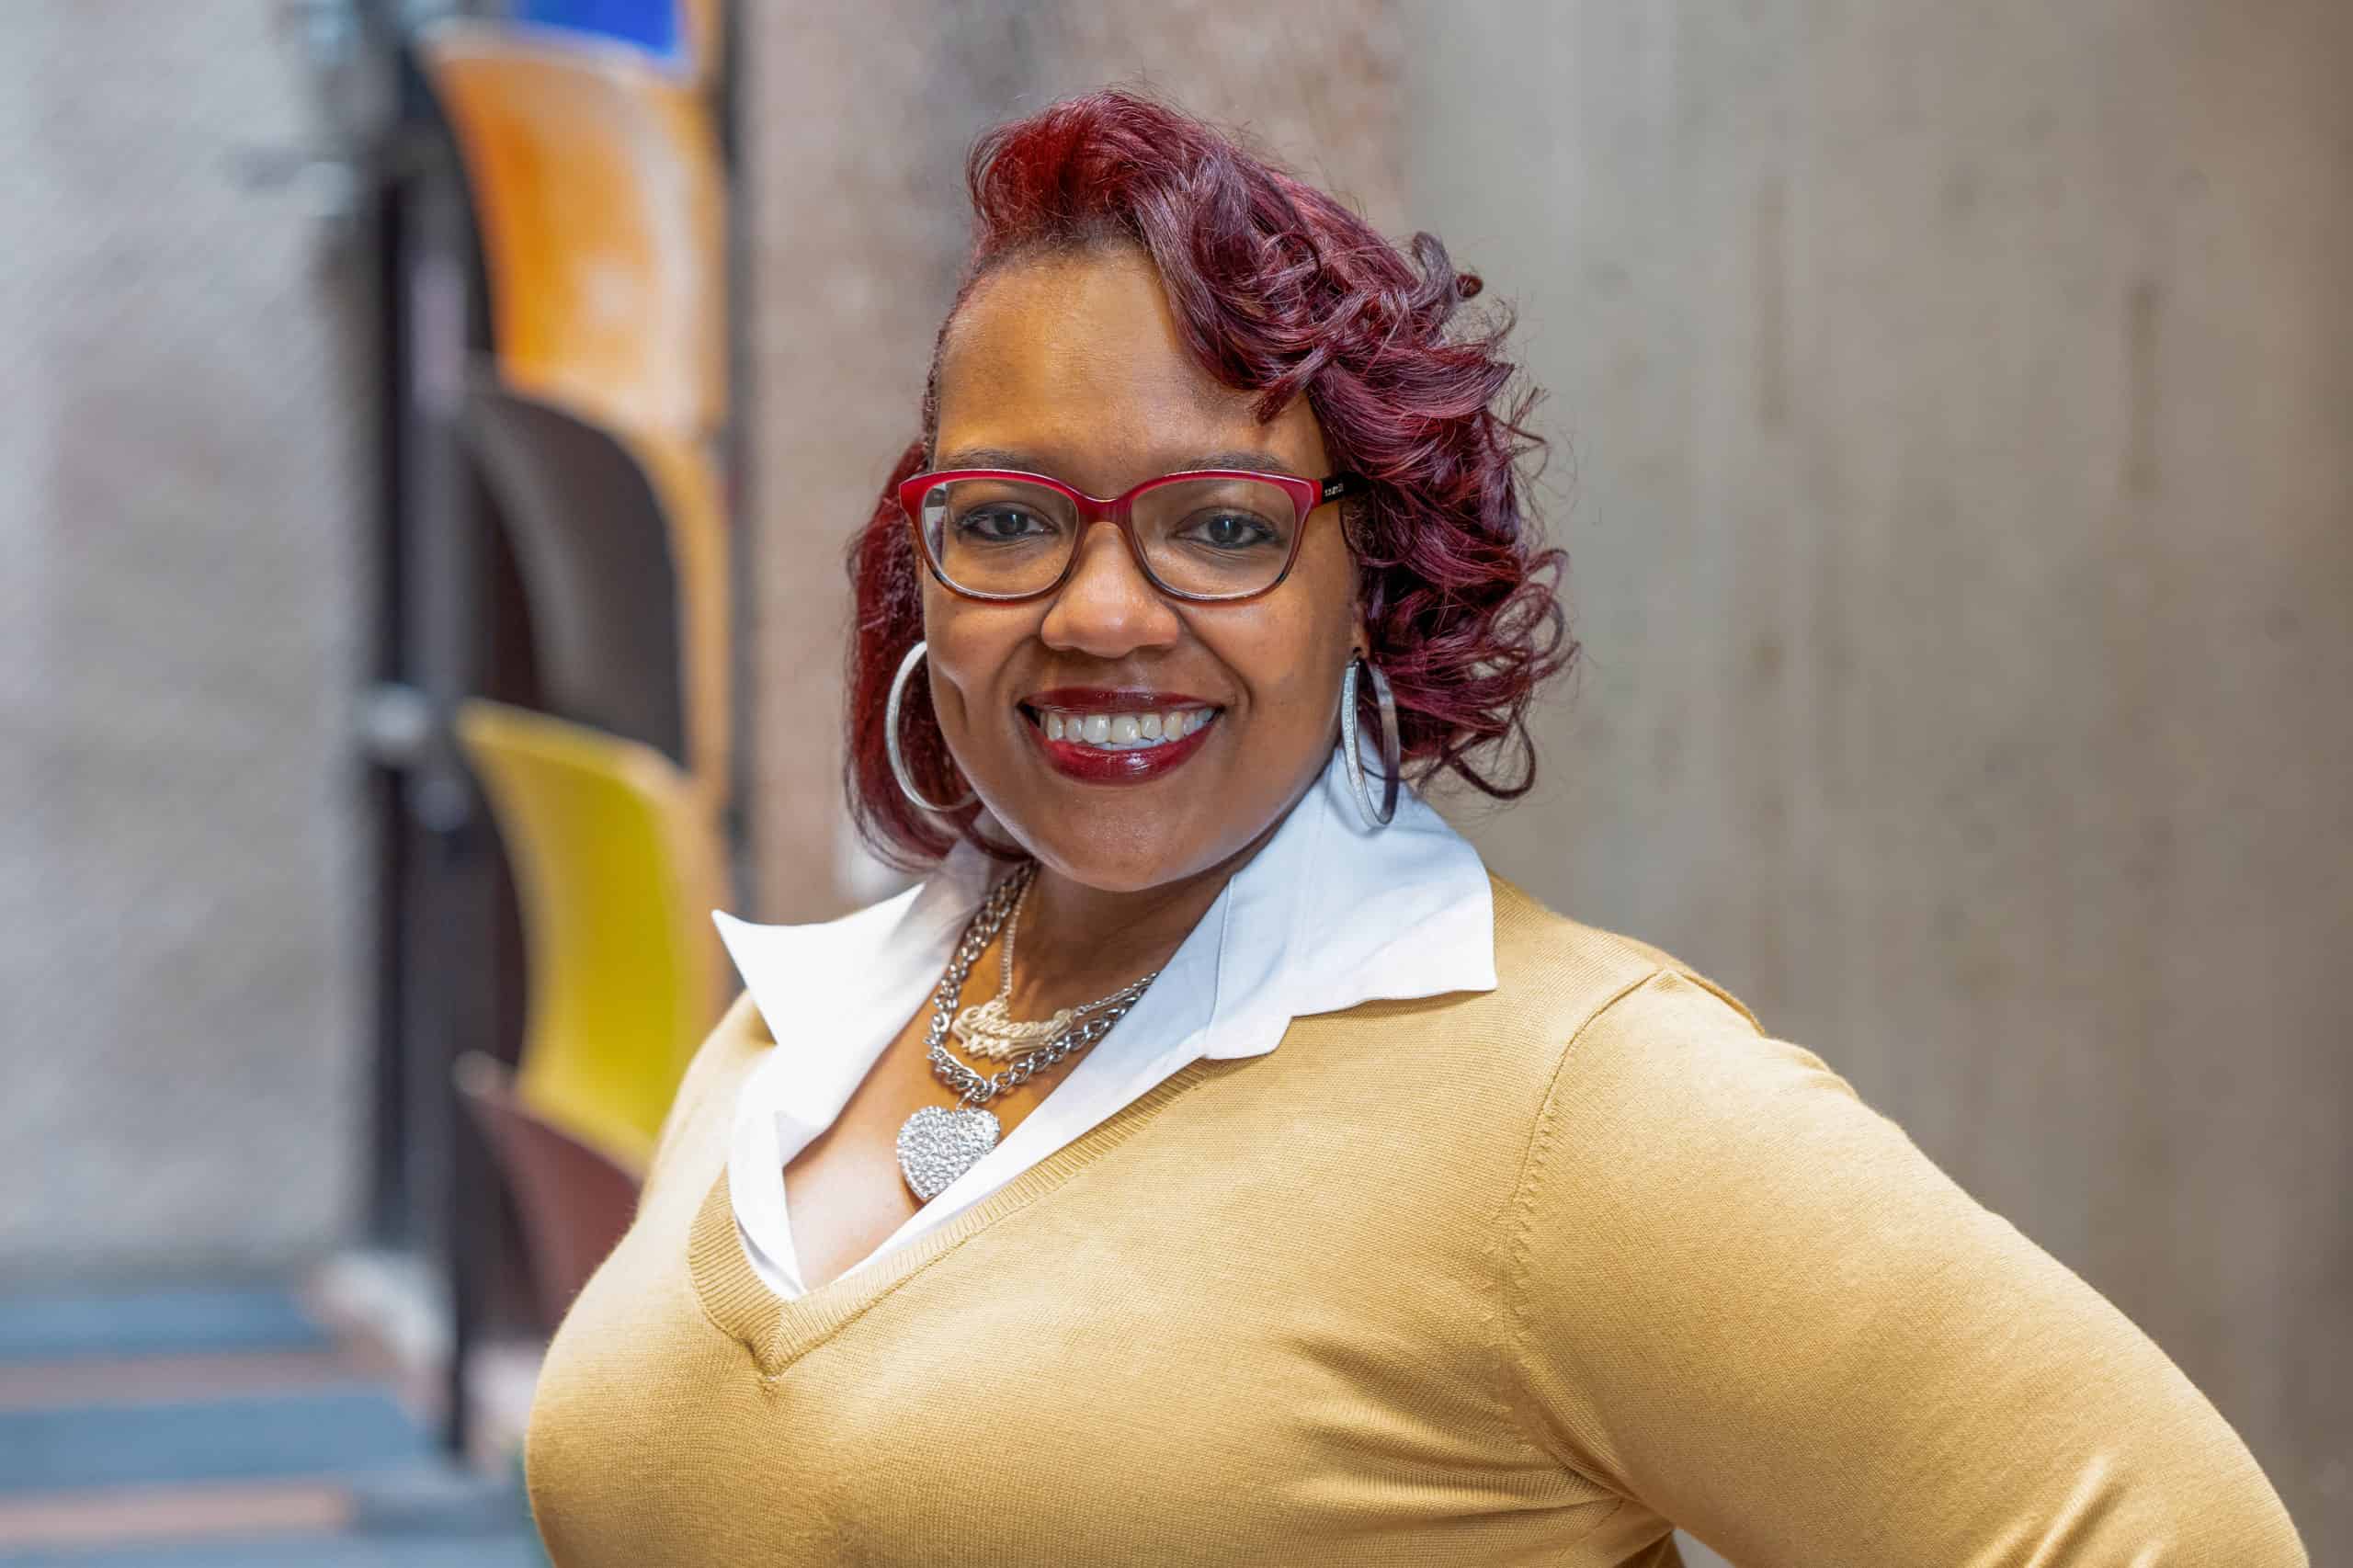 Sheena Solomon is the Executive Director of The Gifford Foundation. She is pictured smiling with a yellow dress and red hair.